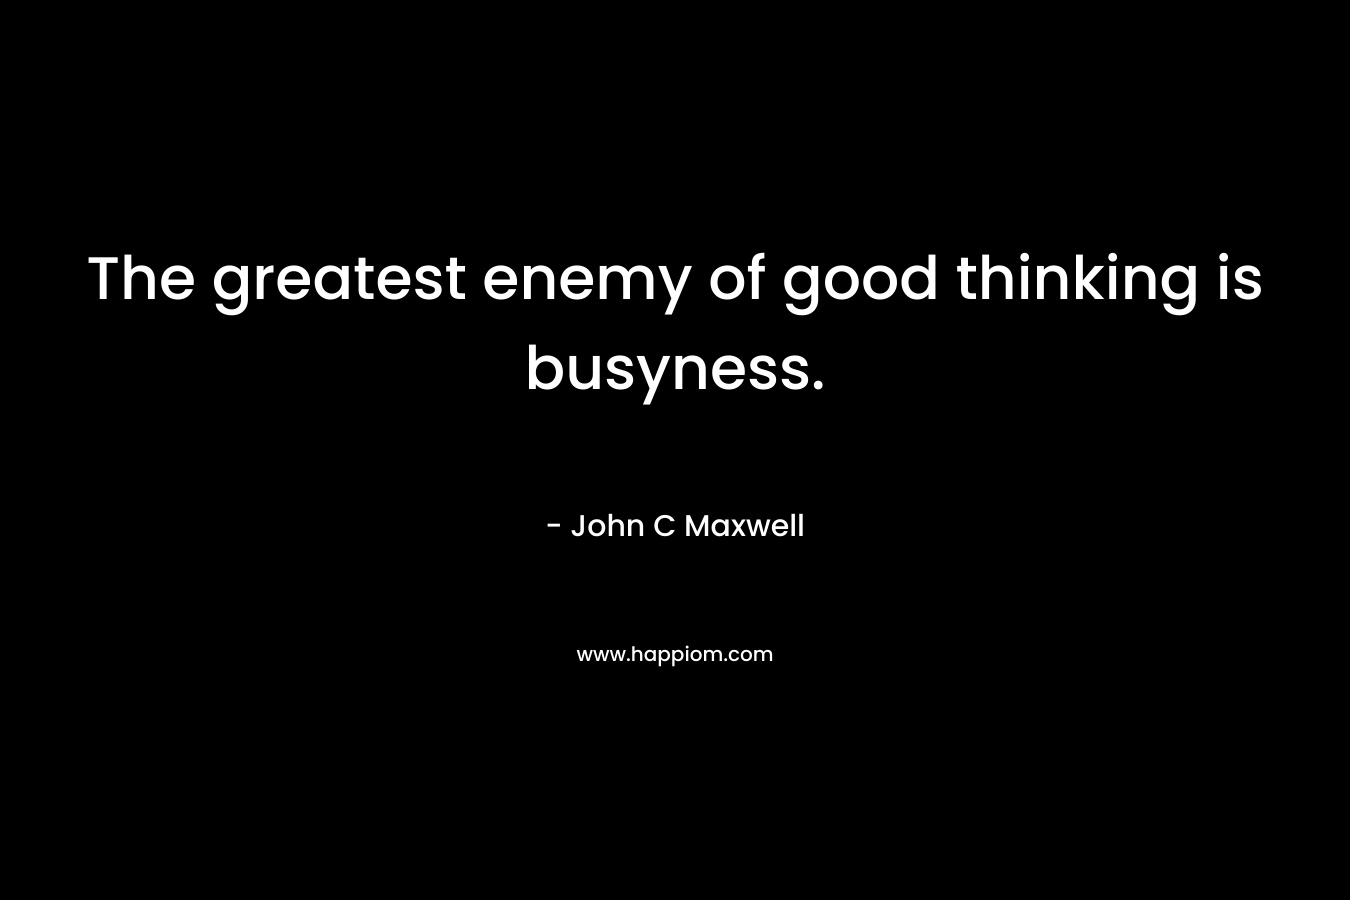 The greatest enemy of good thinking is busyness. – John C Maxwell